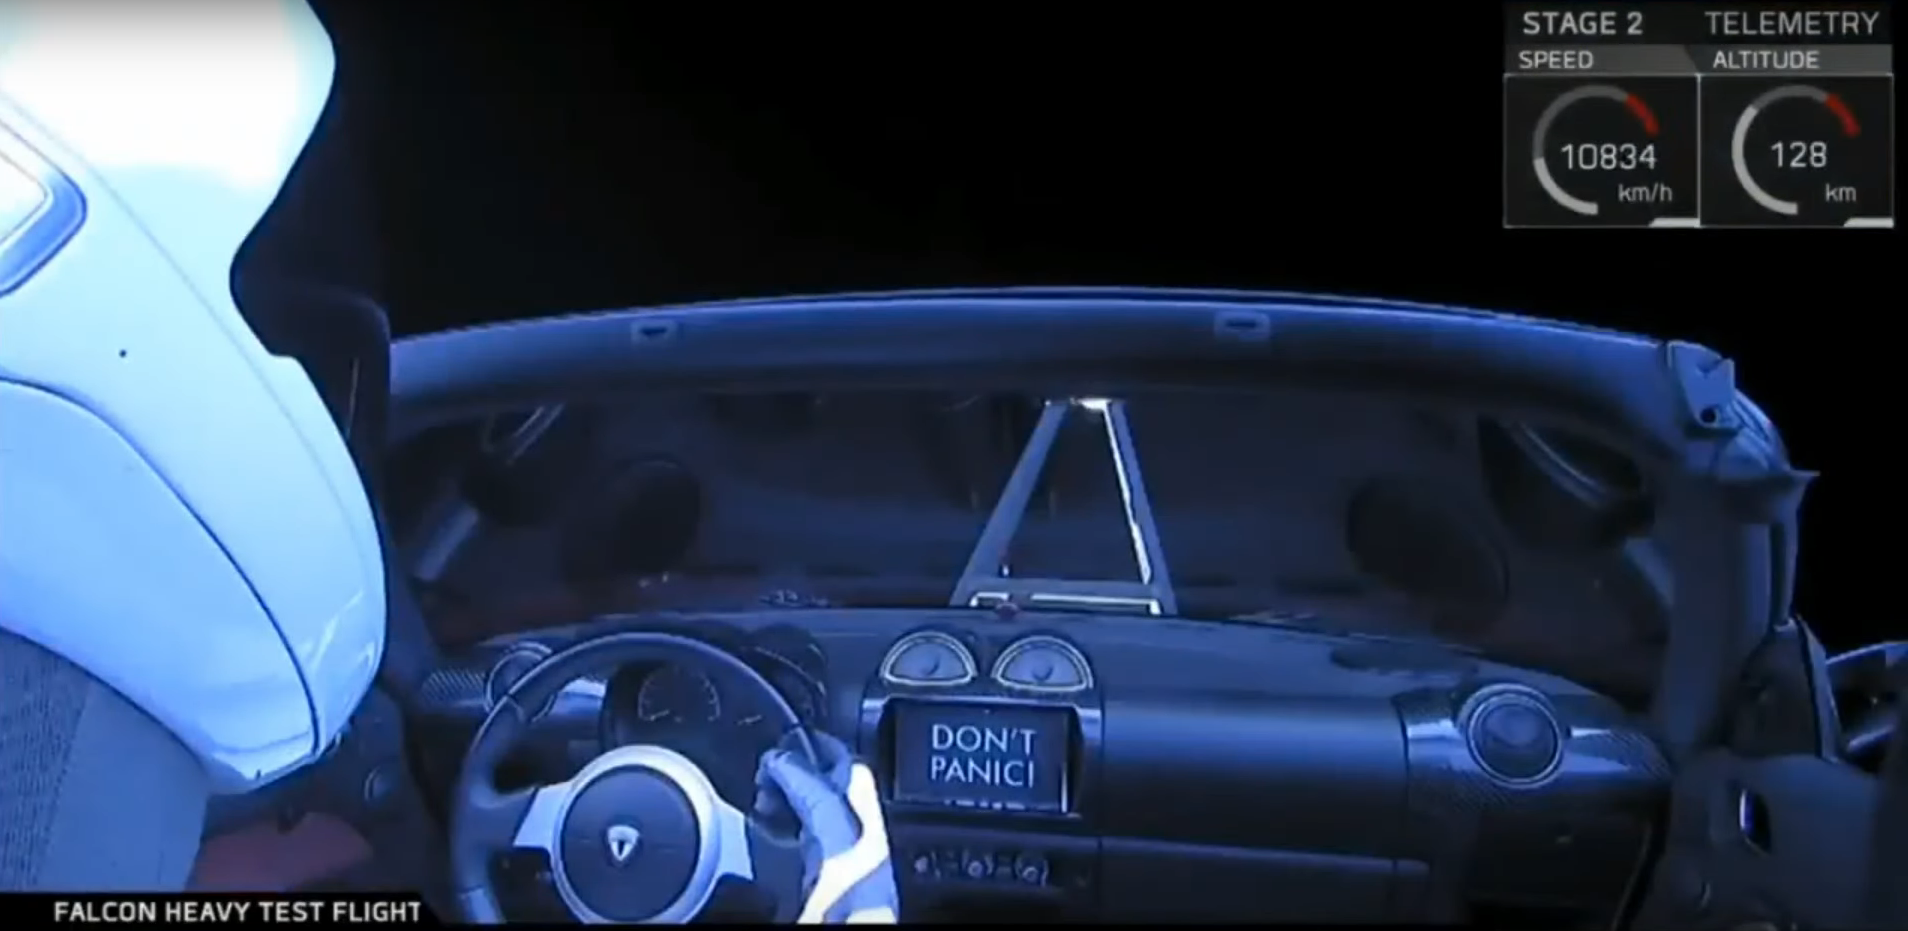 By far the best part of the SpaceX Falcon Heavy launch